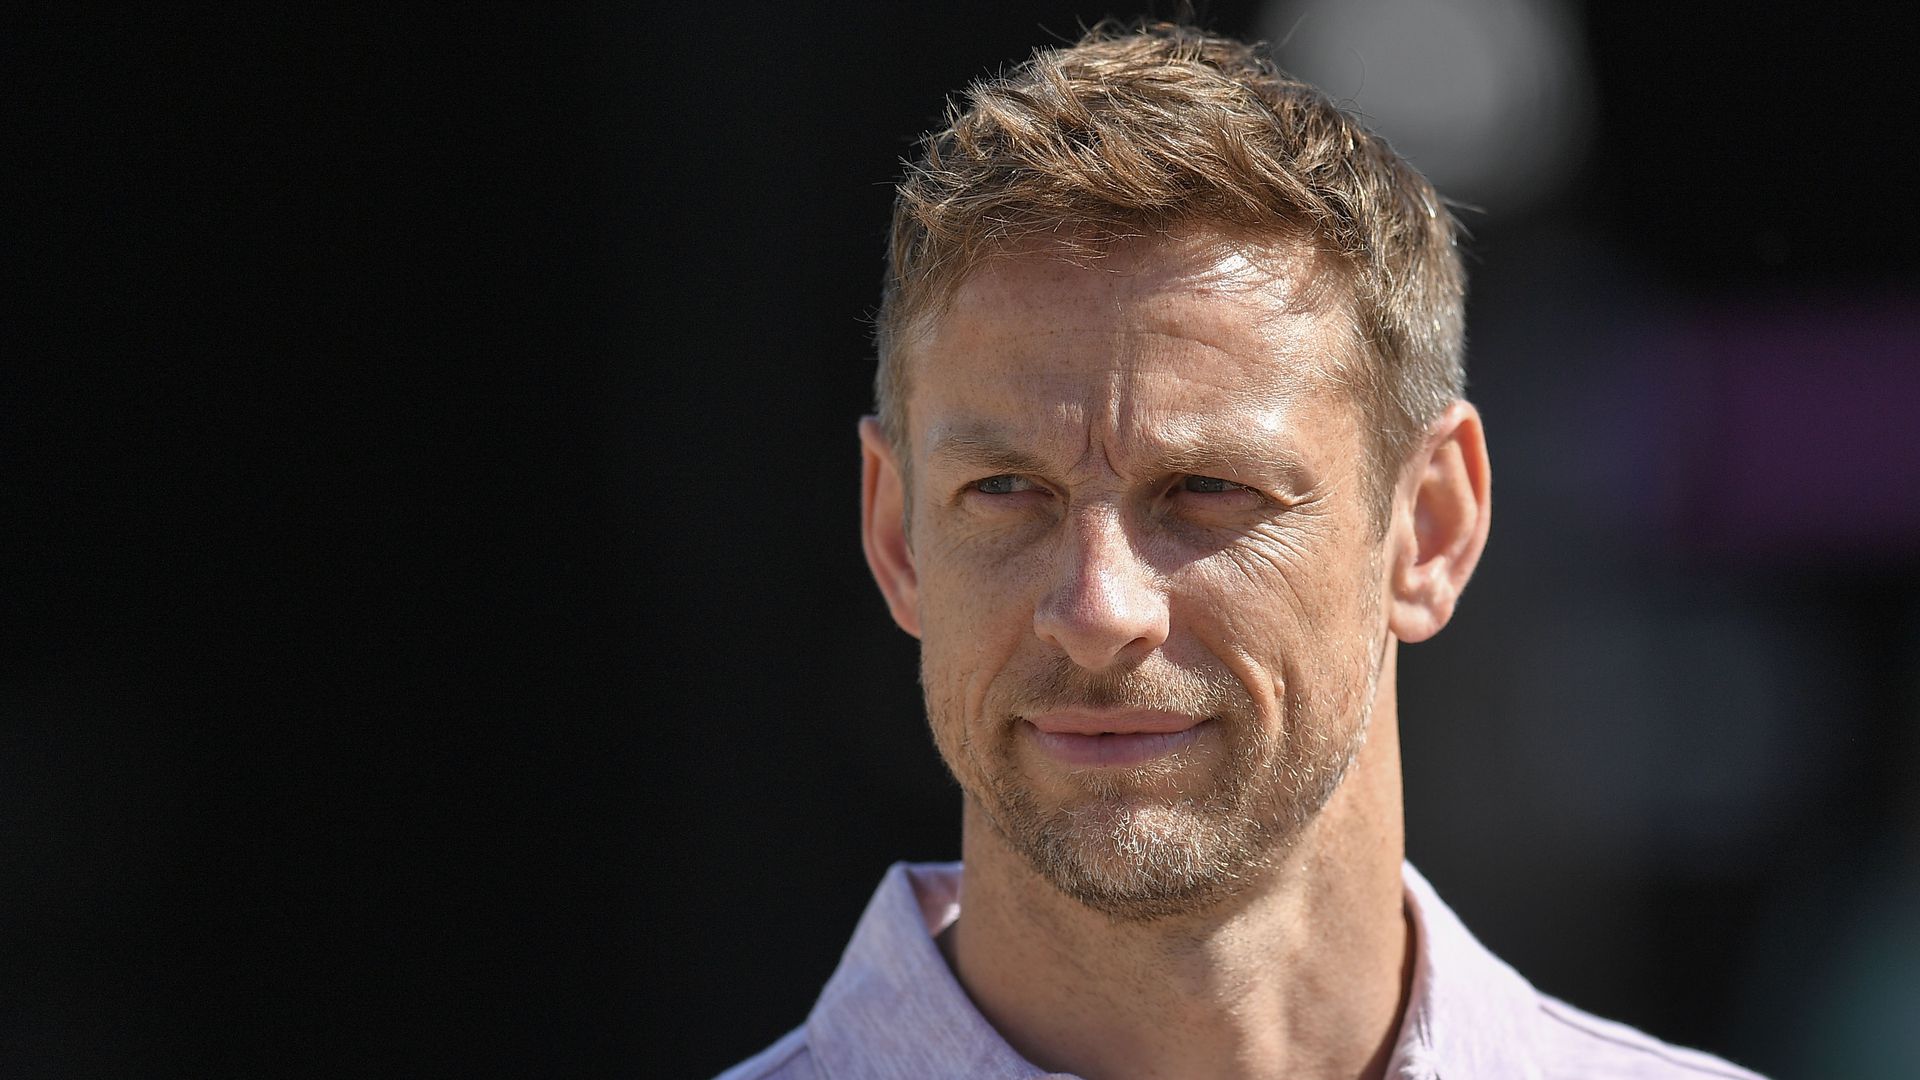 jenson button on logan sargeant, his f1 career, and ‘lap of legends’